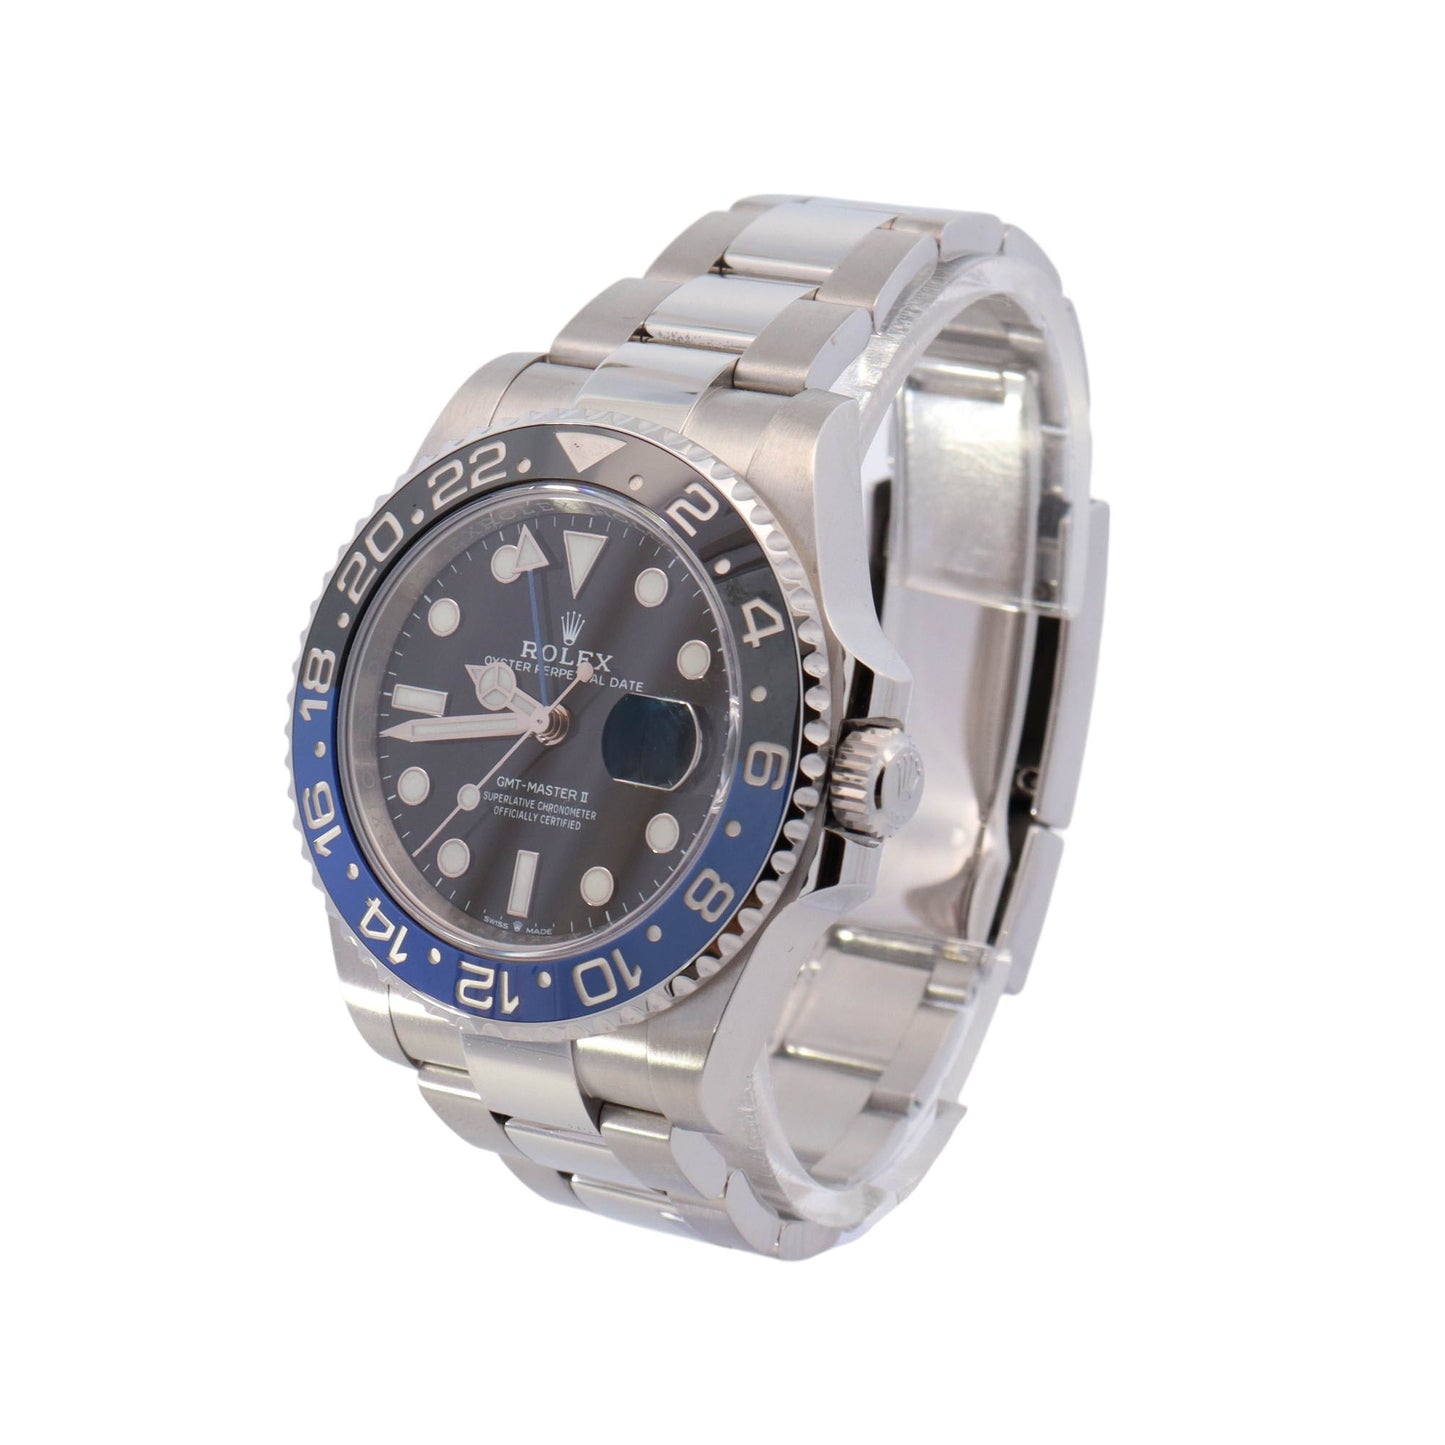 Rolex GMT Master II Stainless Steel 40mm Black Dot Dial Watch Reference #: 126710BLNR